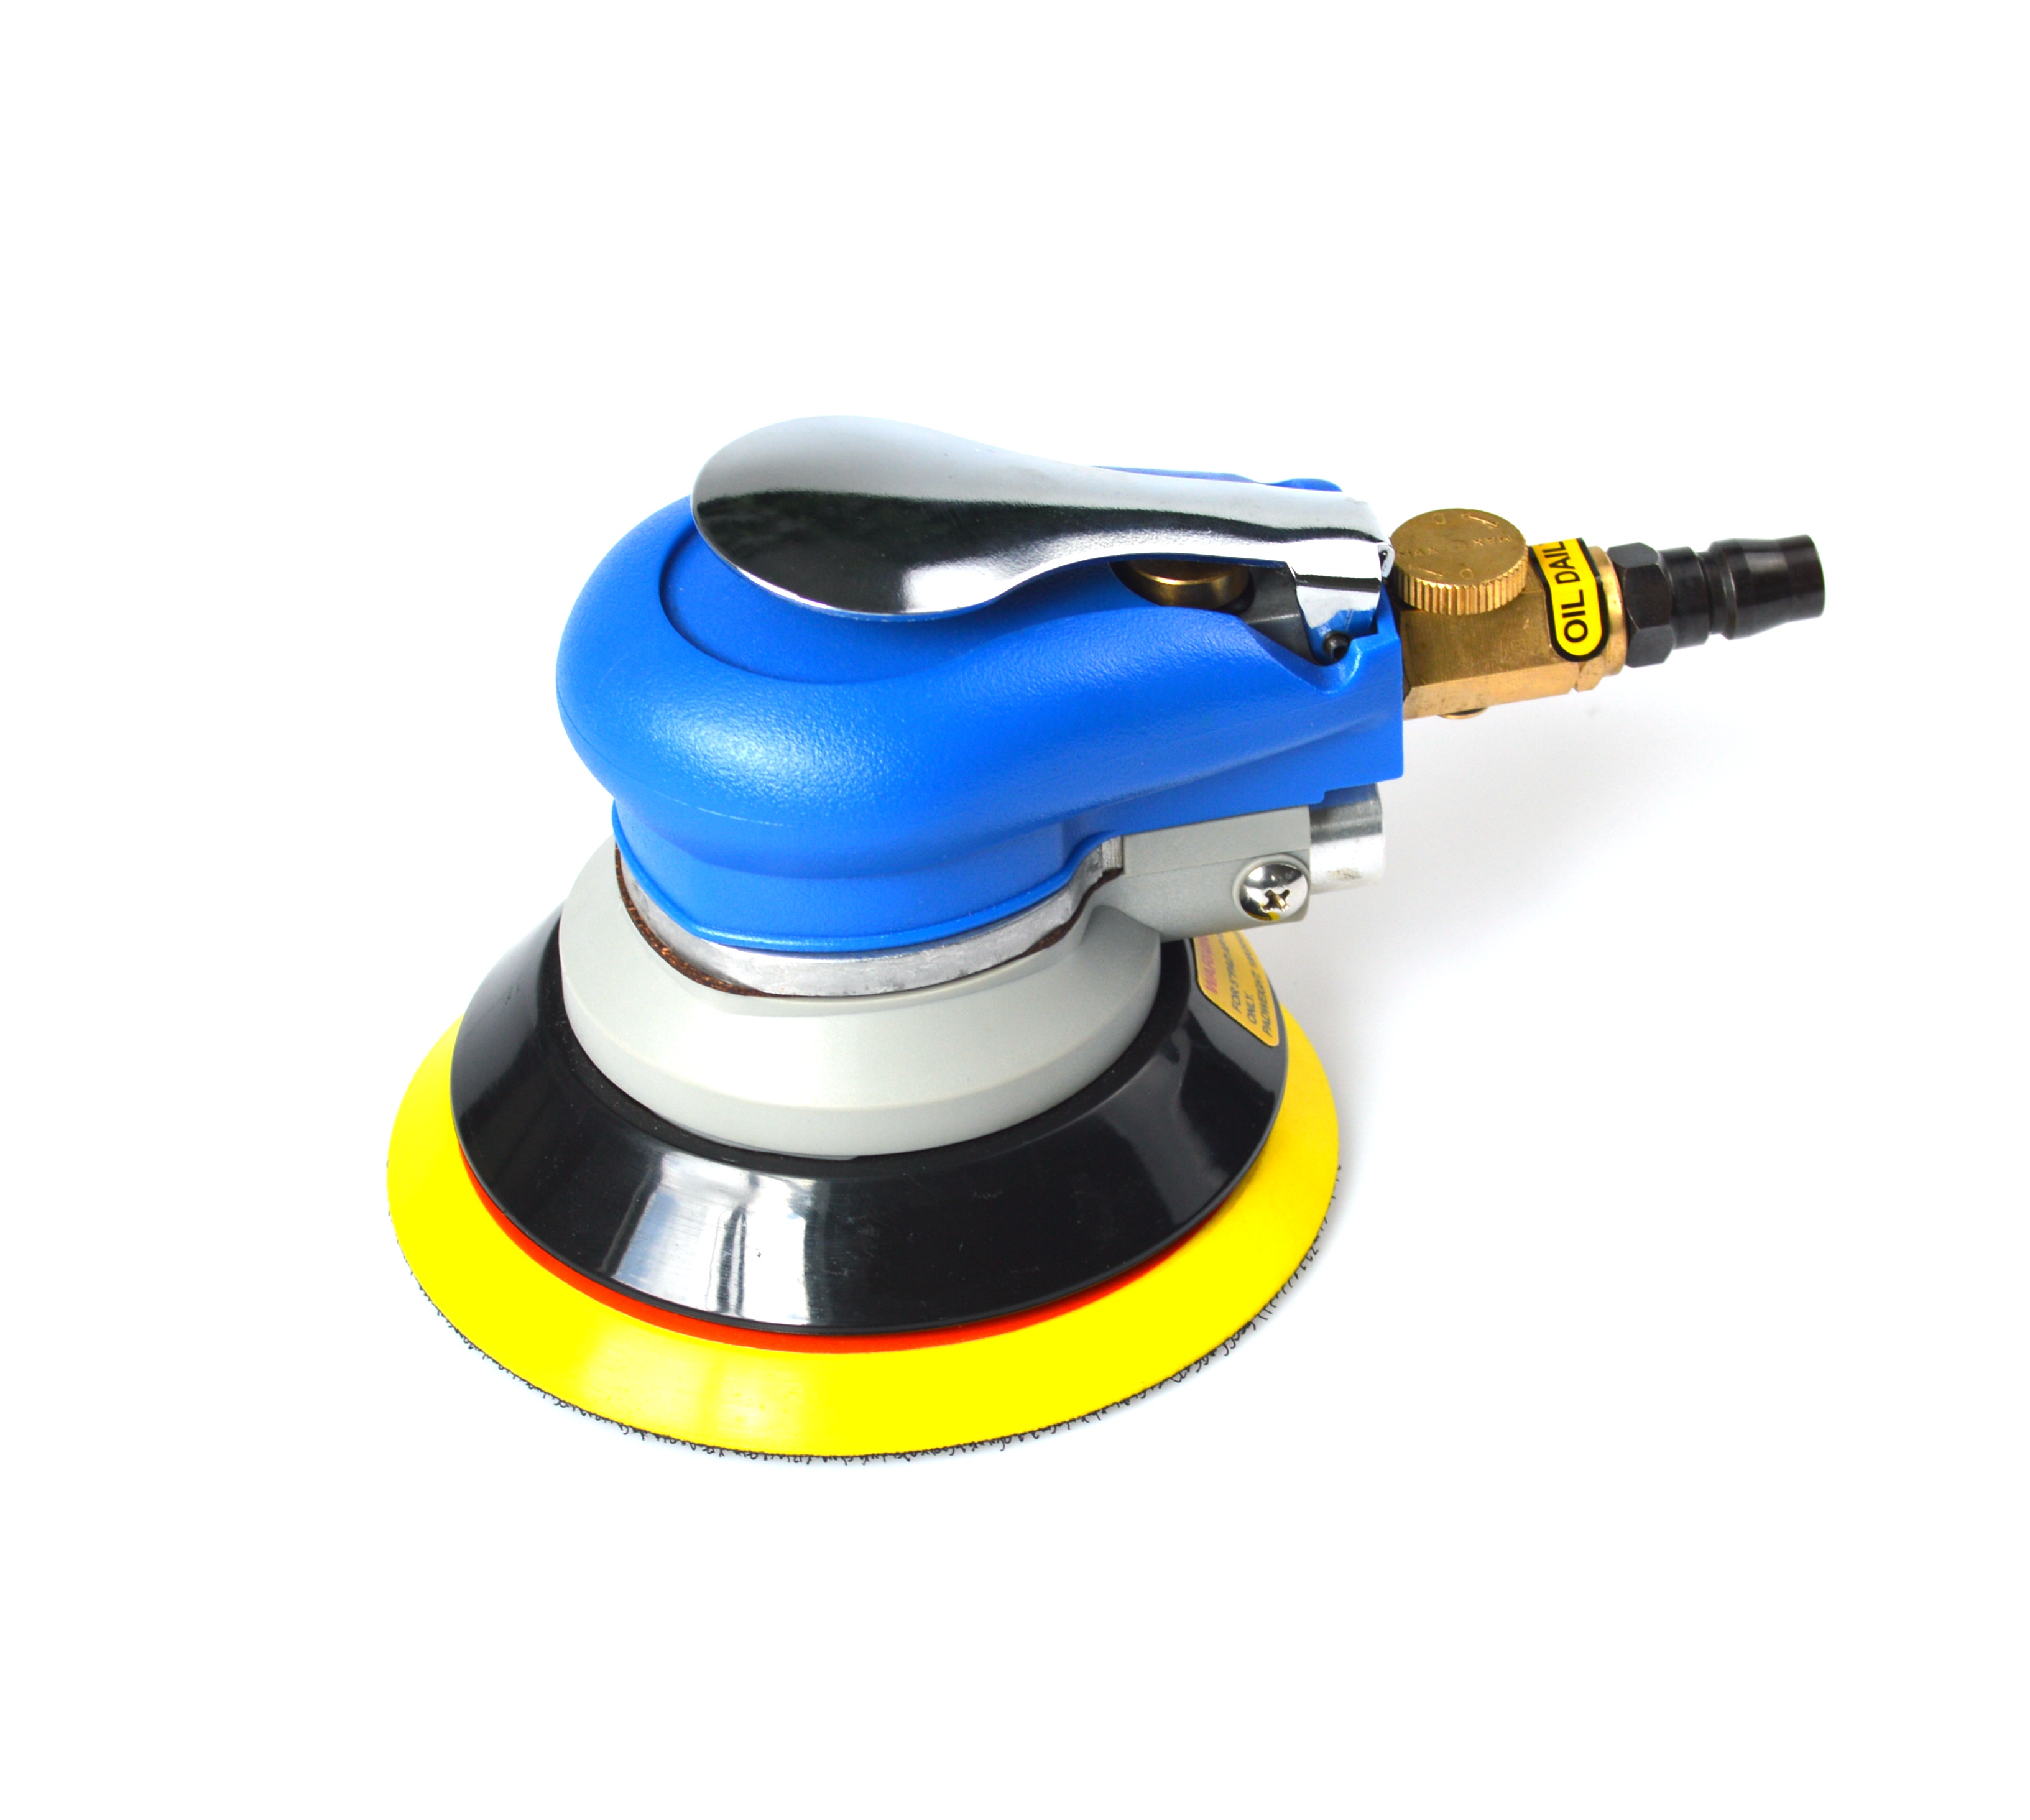 5 inch 6 inch Dual Action plam air sander 